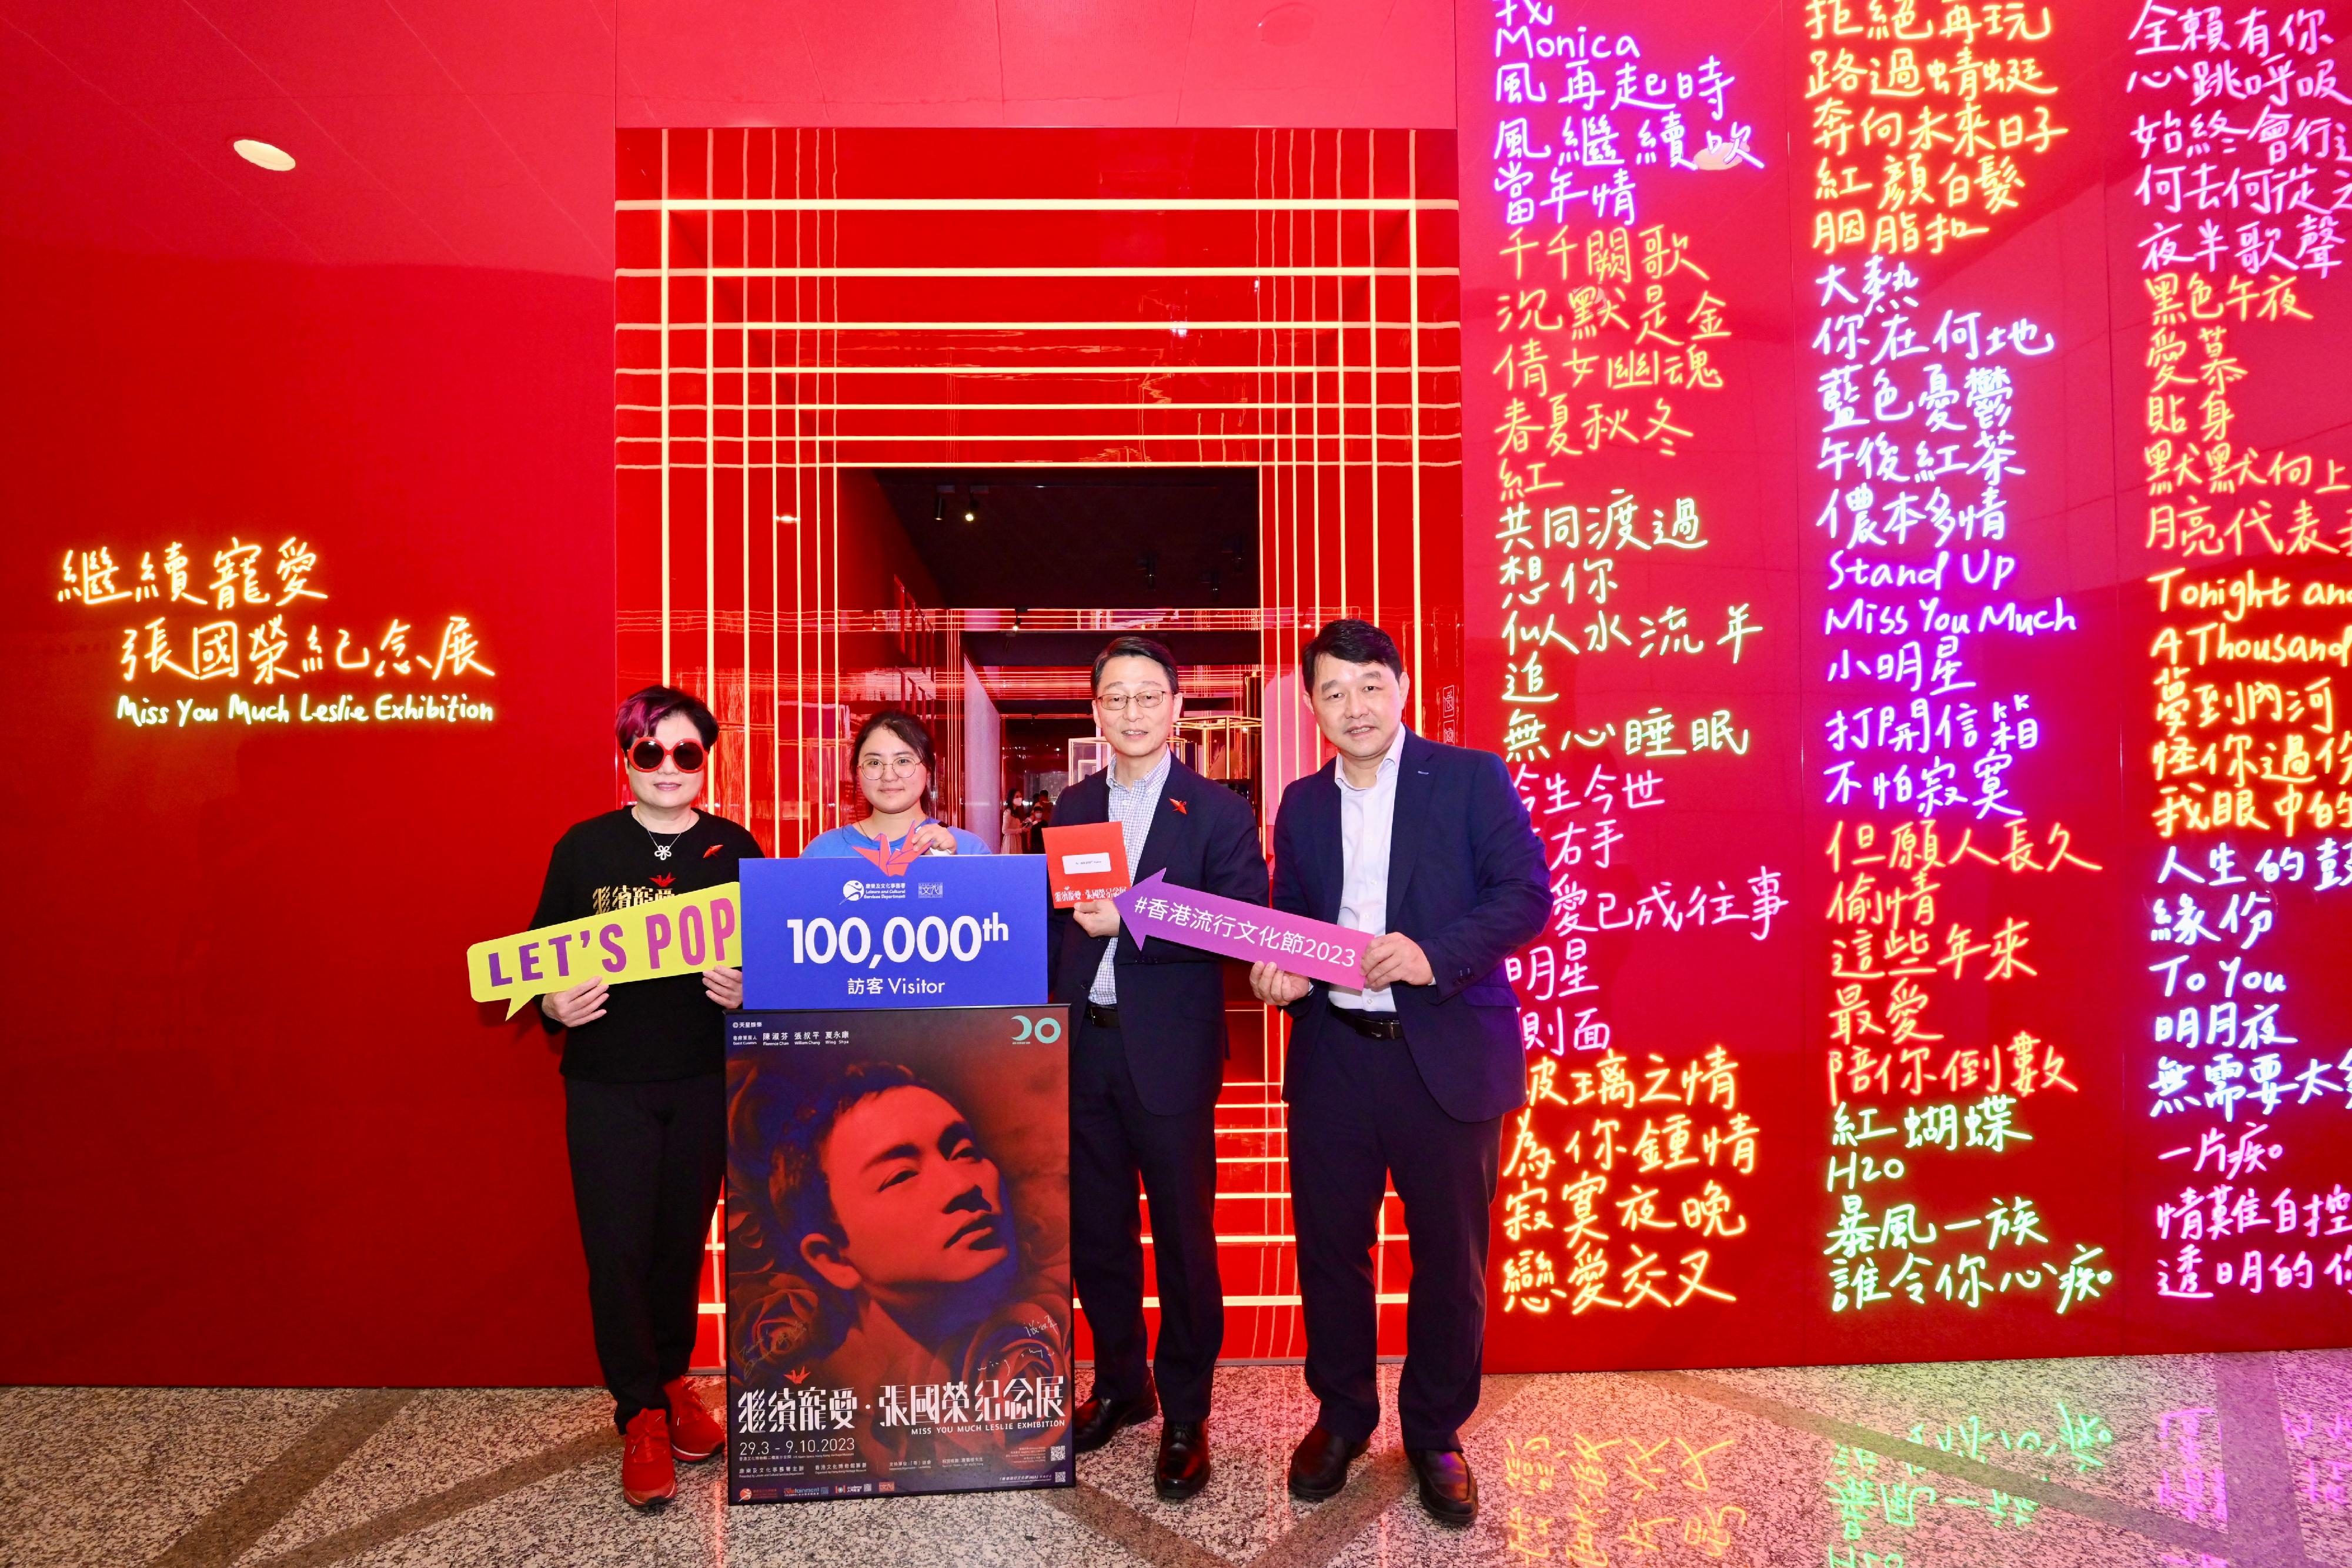 Hong Kong Heritage Museum (HKHM)'s "Miss You Much Leslie Exhibition" has received overwhelming public response since its opening. The exhibition received its 100,000th visitor today (April 30). Picture shows one of the guest curators of the exhibition, Ms Florence Chan (first left); the Director of Leisure and Cultural Services, Mr Vincent Liu (second right), and the Museum Director of the HKHM, Mr Brian Lam (first right), welcoming the 100,000th visitor, and presented to the visitor an exhibition poster with autograph of the three guest curators and complimentary tickets for Hong Kong Film Archive’s film screening programme "Revisiting the Glory Days - The Legacy of Leslie and Anita".